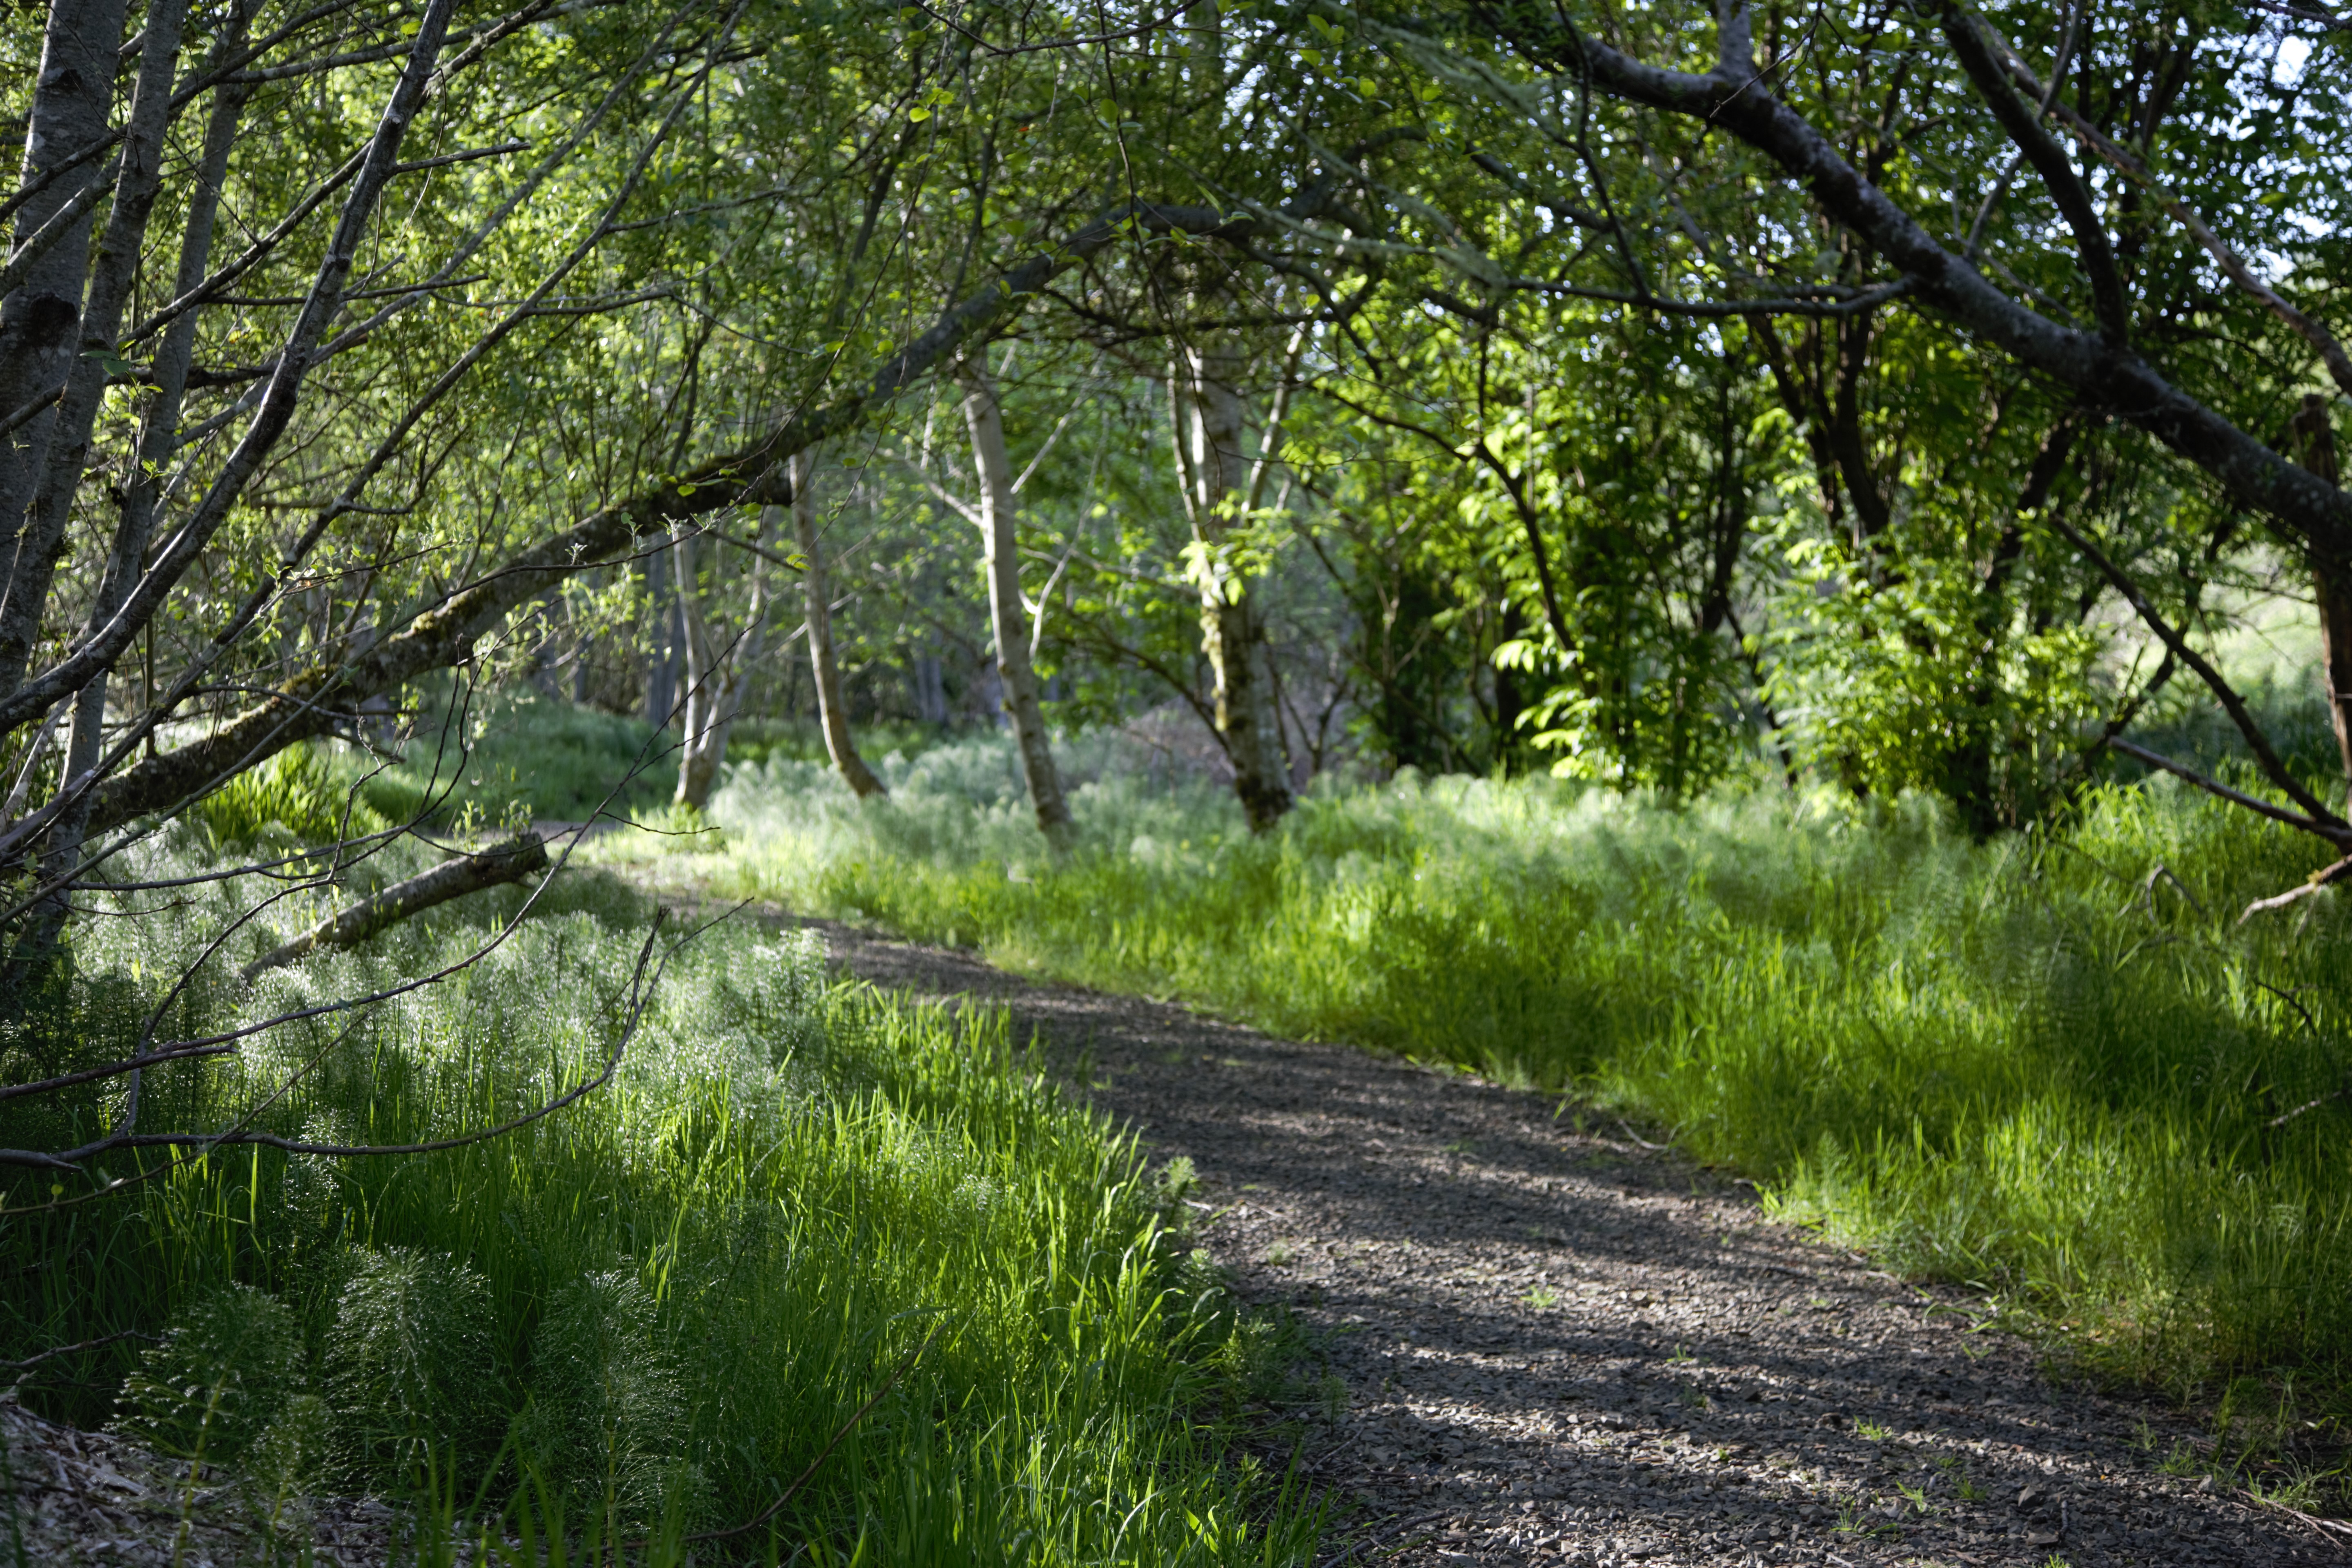 A gravel path winds through a glowing green canopy